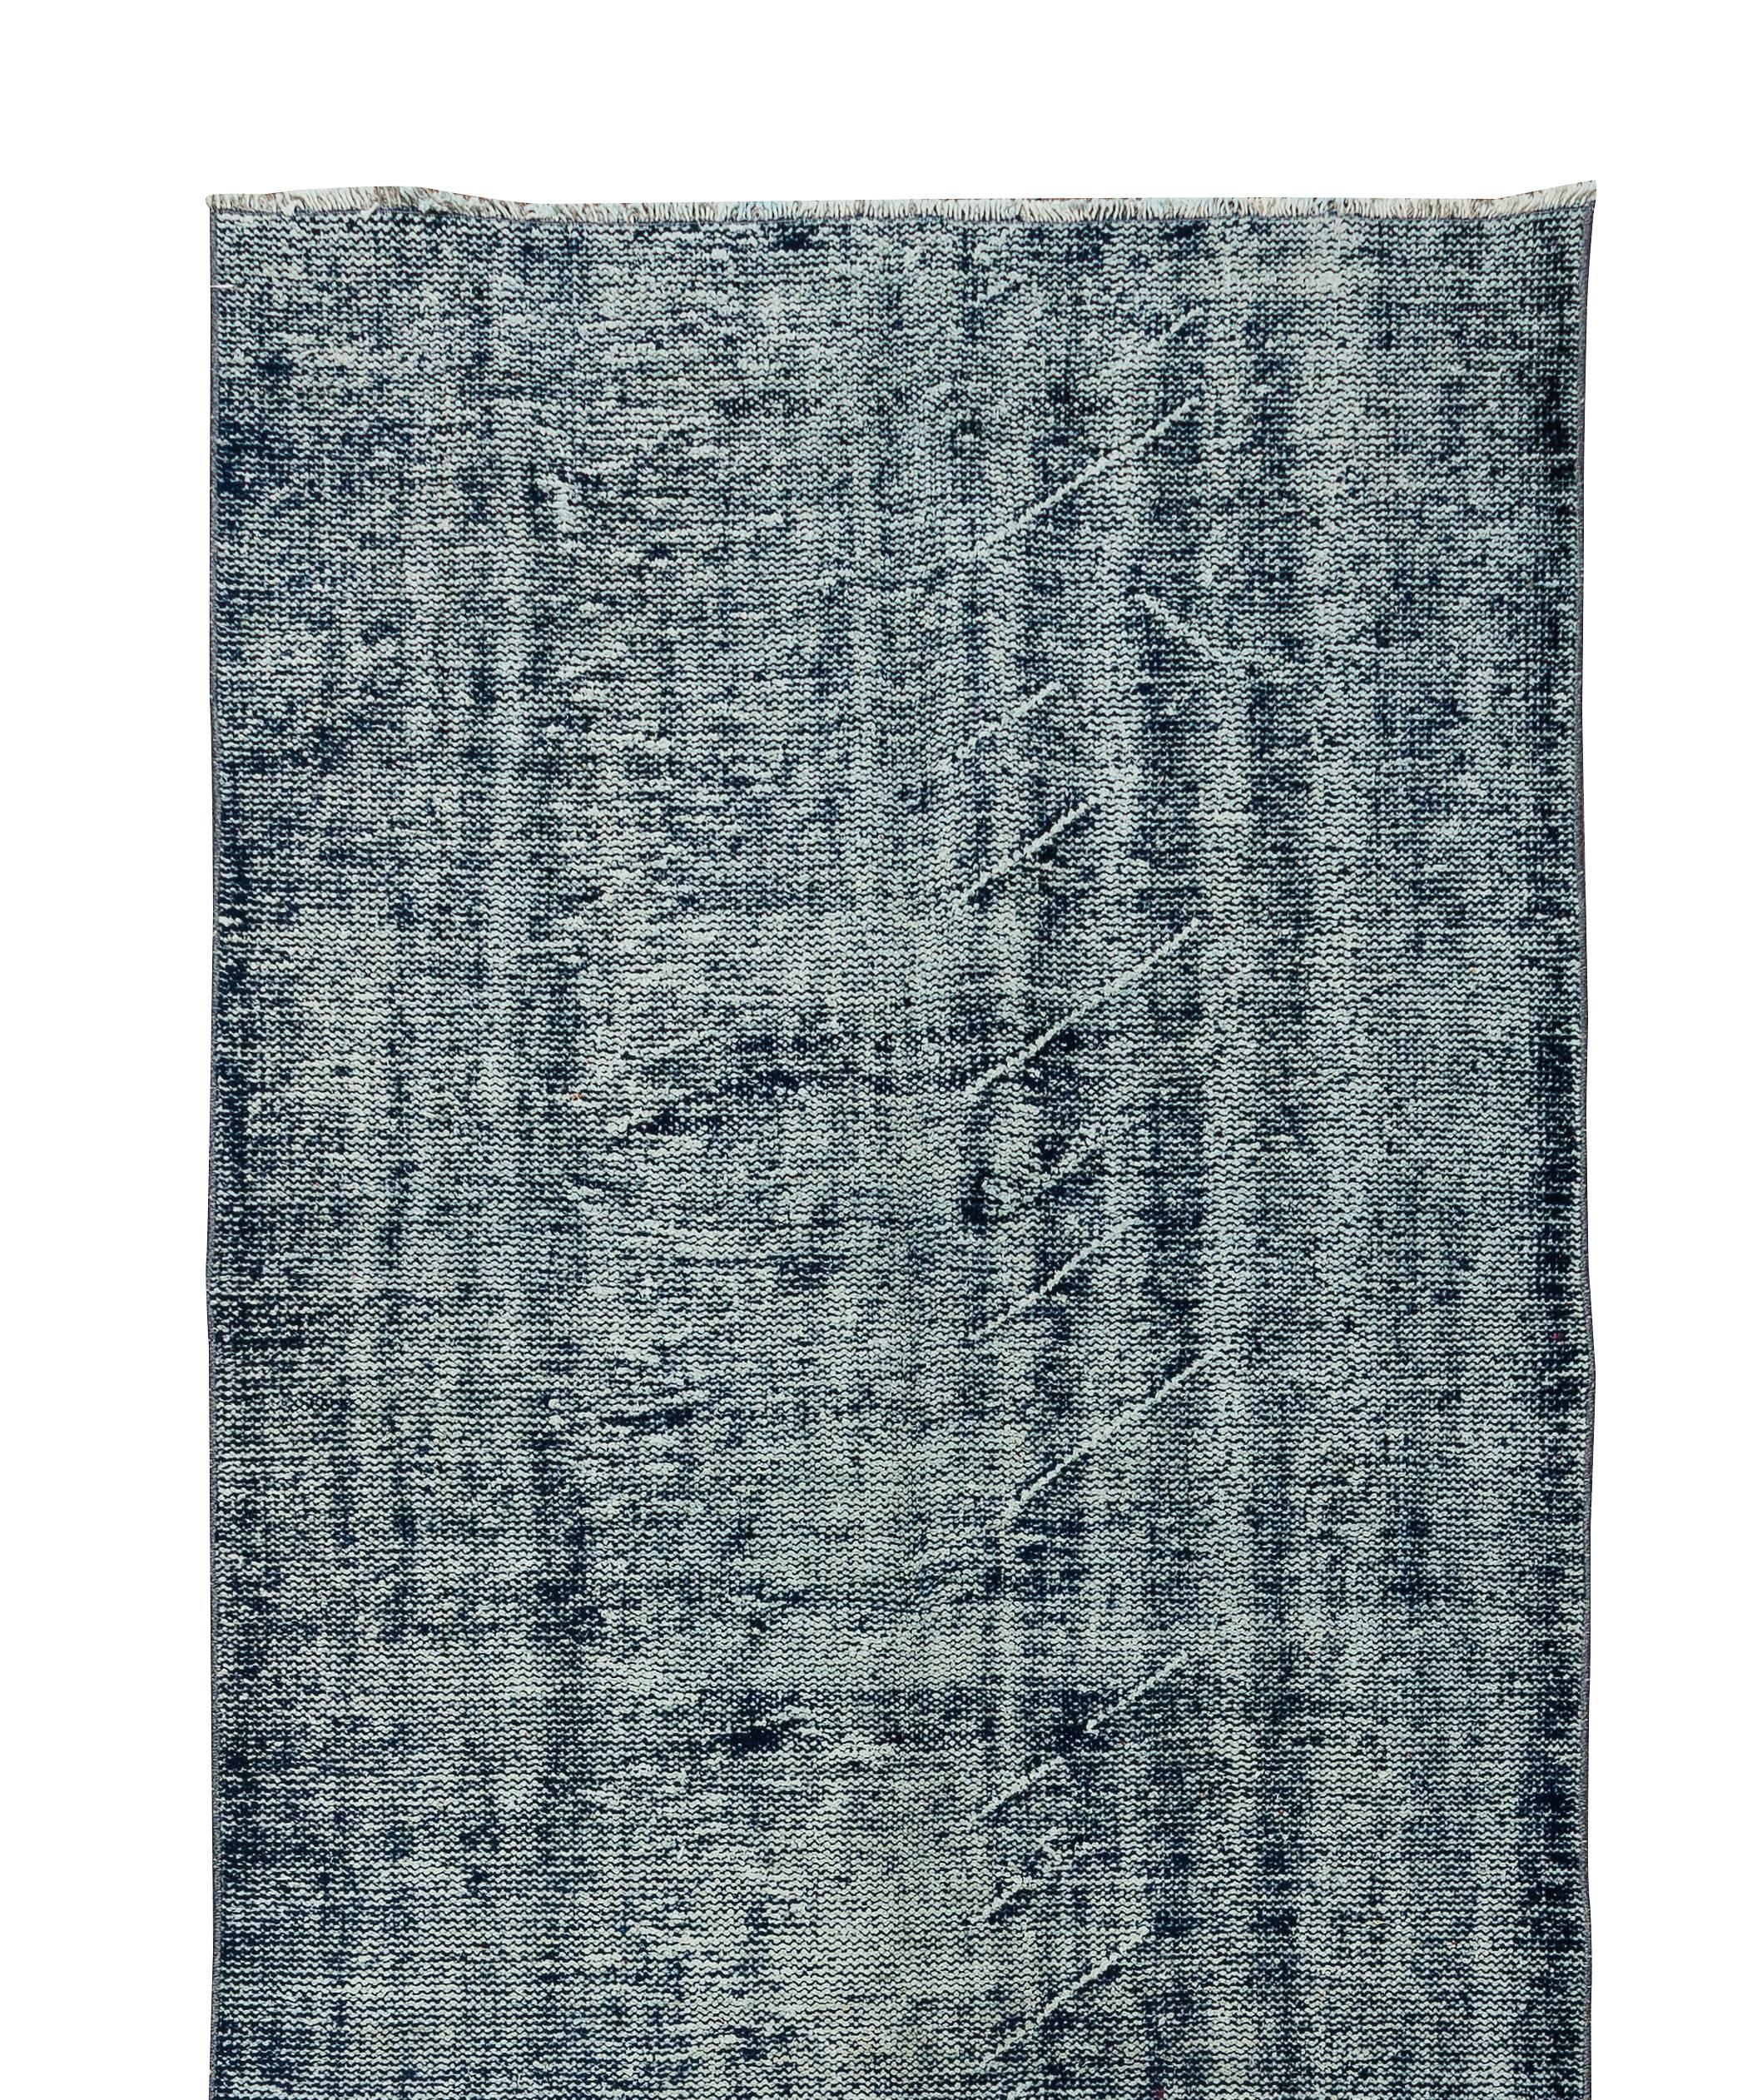 Hand-Woven 4.2x11.4 Ft Distressed Vintage Handmade Turkish Runner Rug in Navy Blue Colors